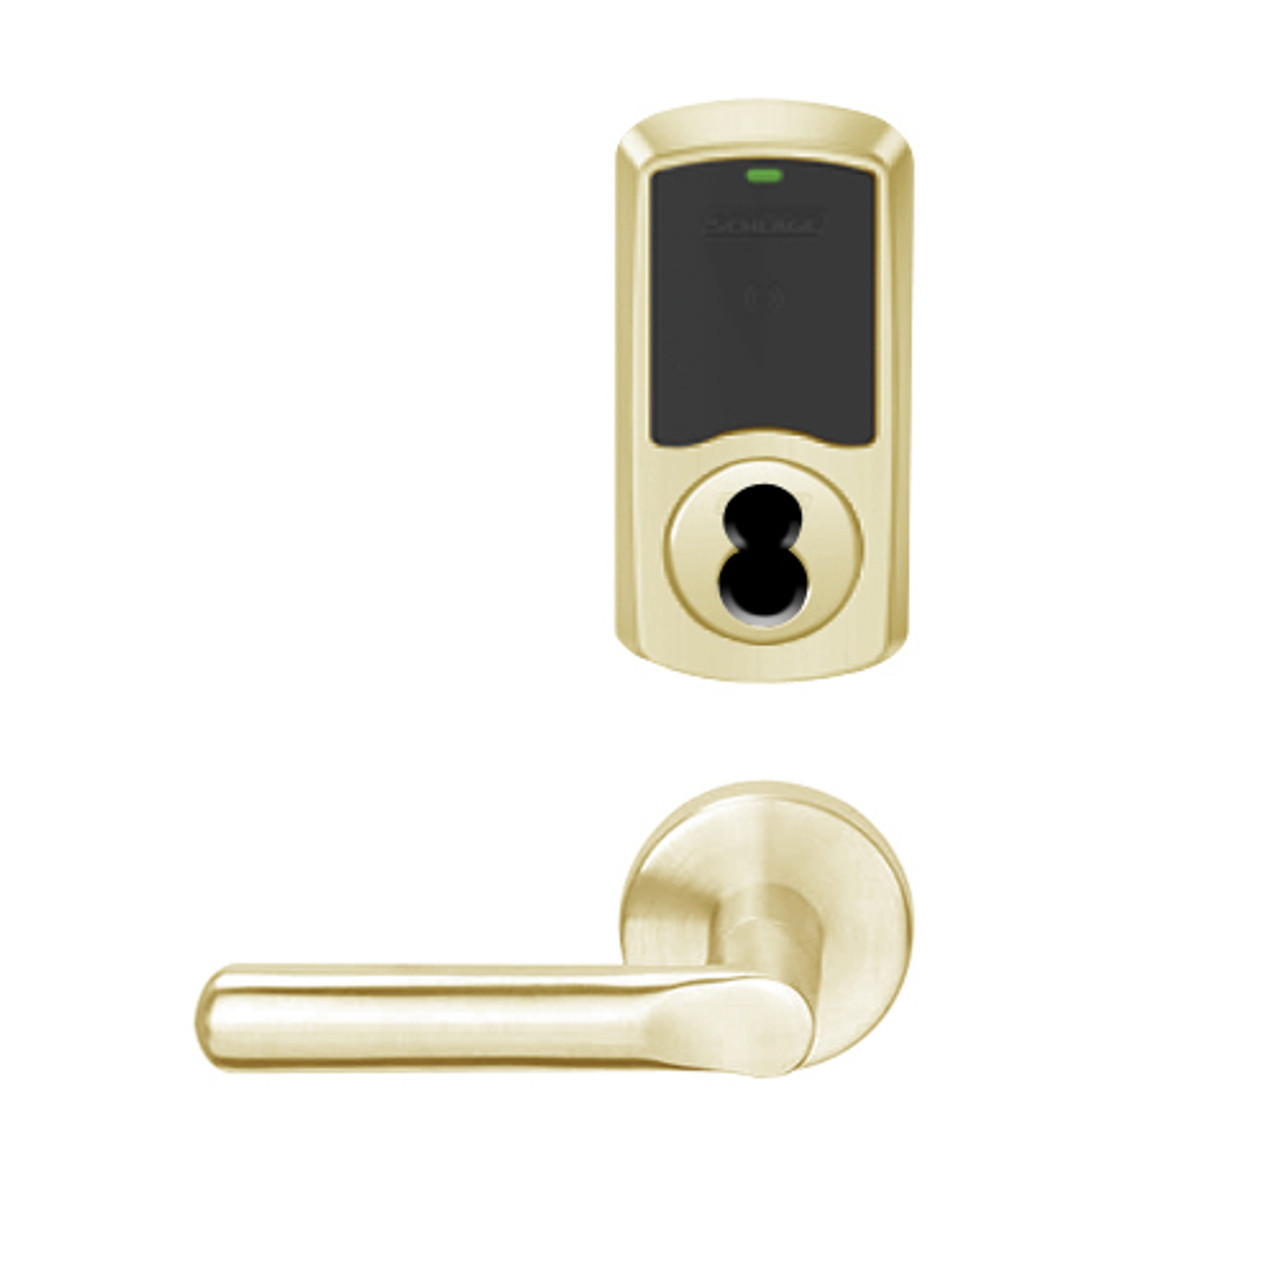 LEMS-GRW-BD-18-606-00A Schlage Storeroom Wireless Greenwich Mortise Lock with LED Indicator and 18 Lever Prepped for SFIC in Satin Brass